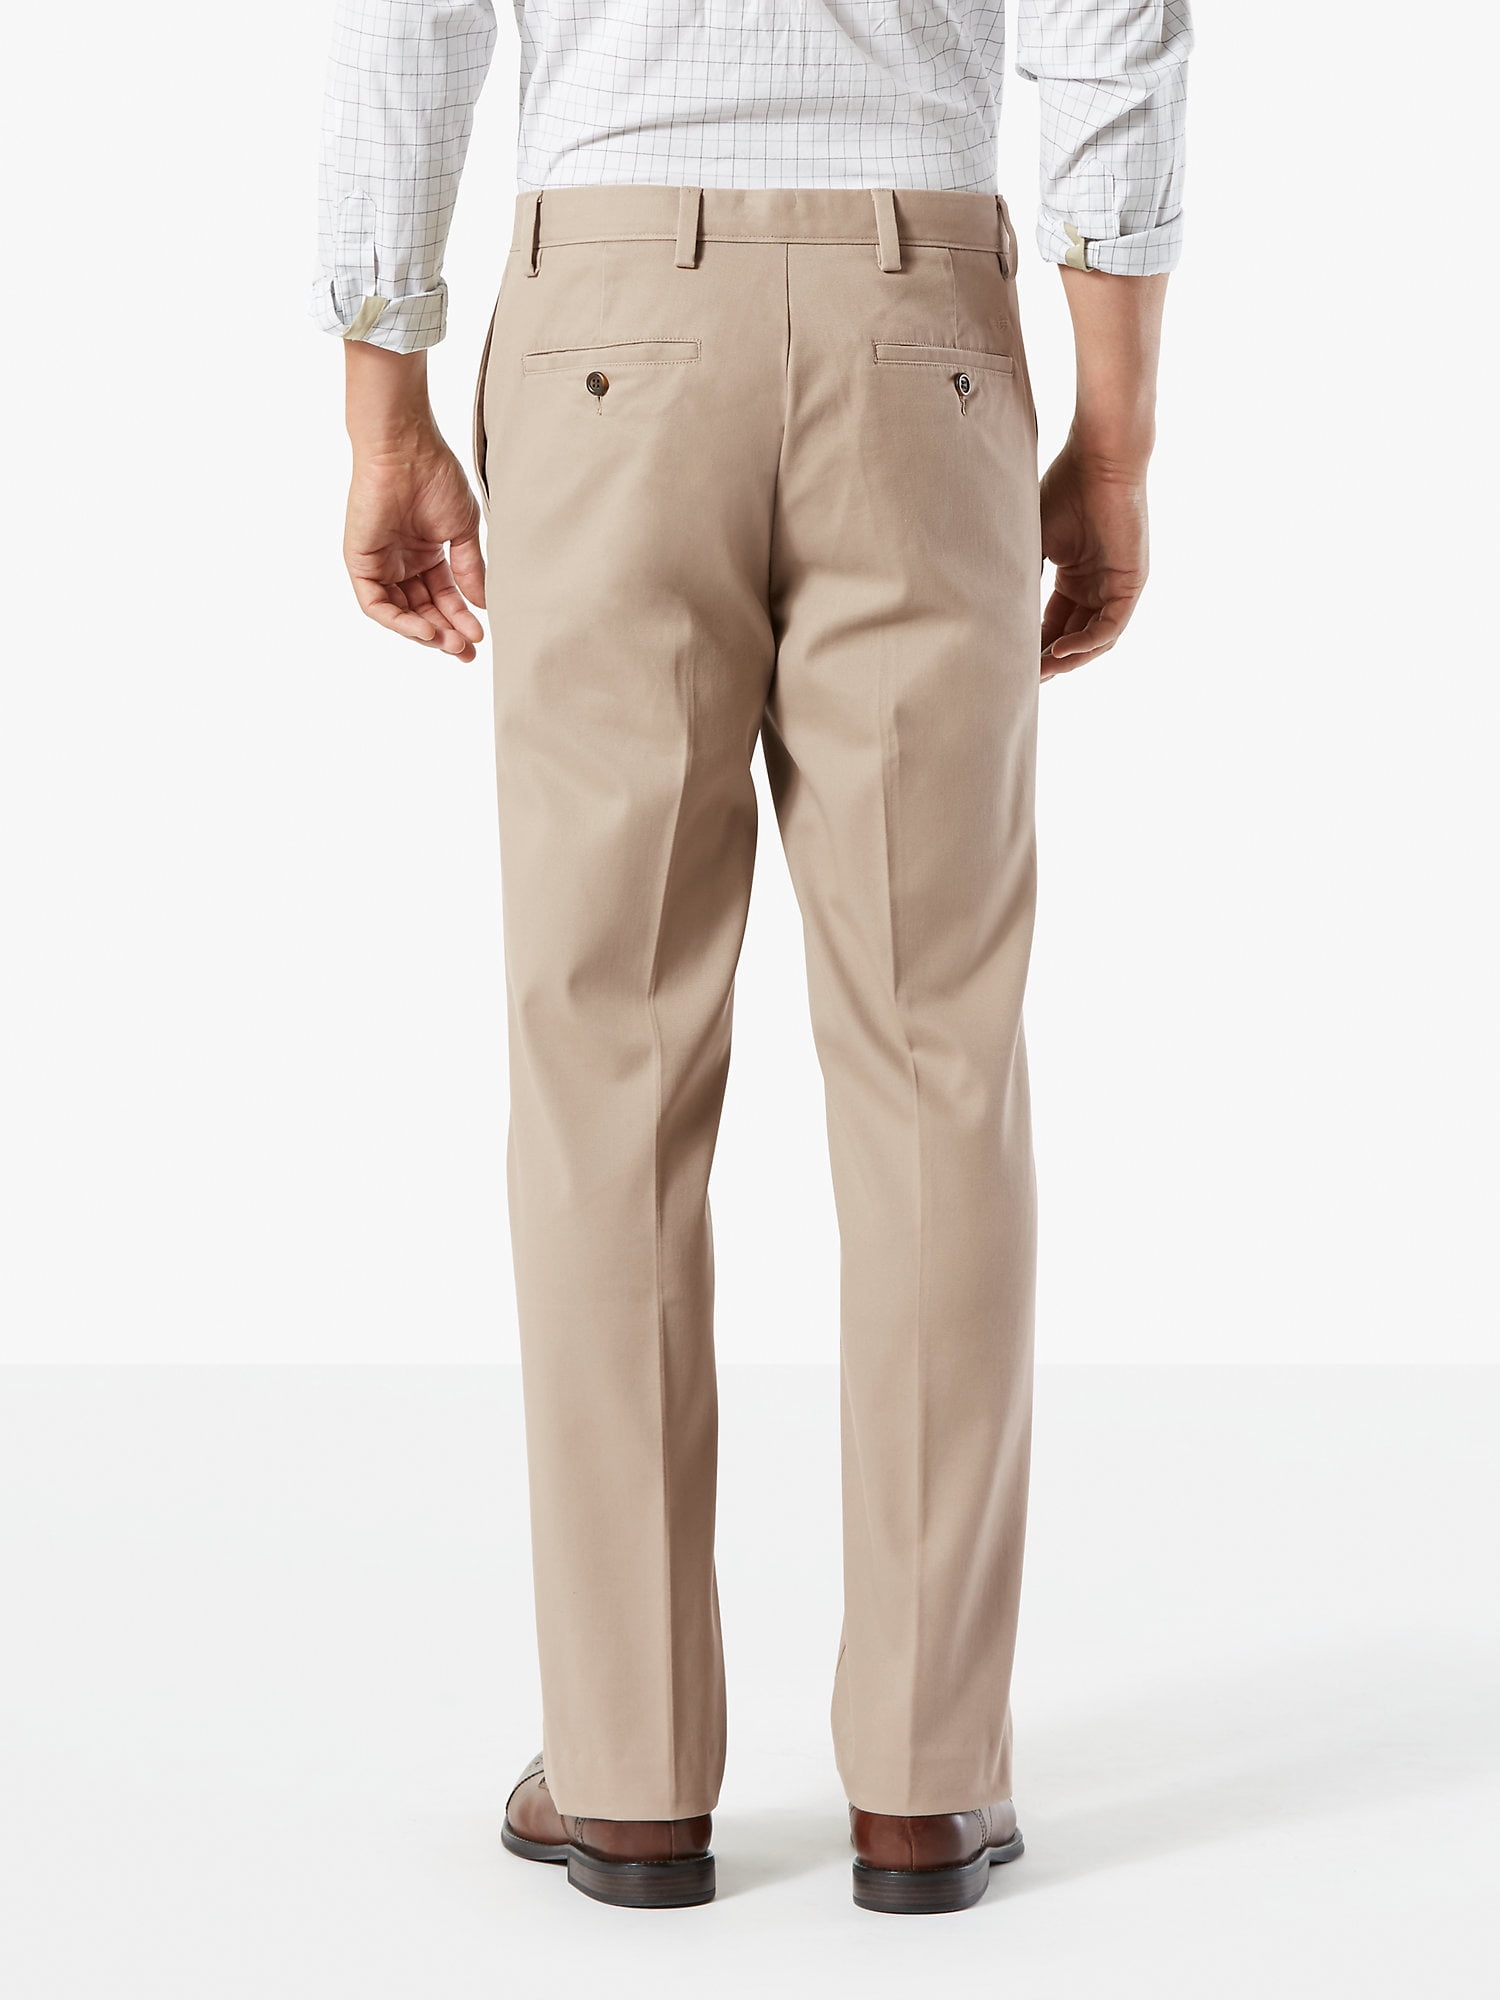 Dockers Men's Classic Flat Front Easy Khaki Pant with Stretch 